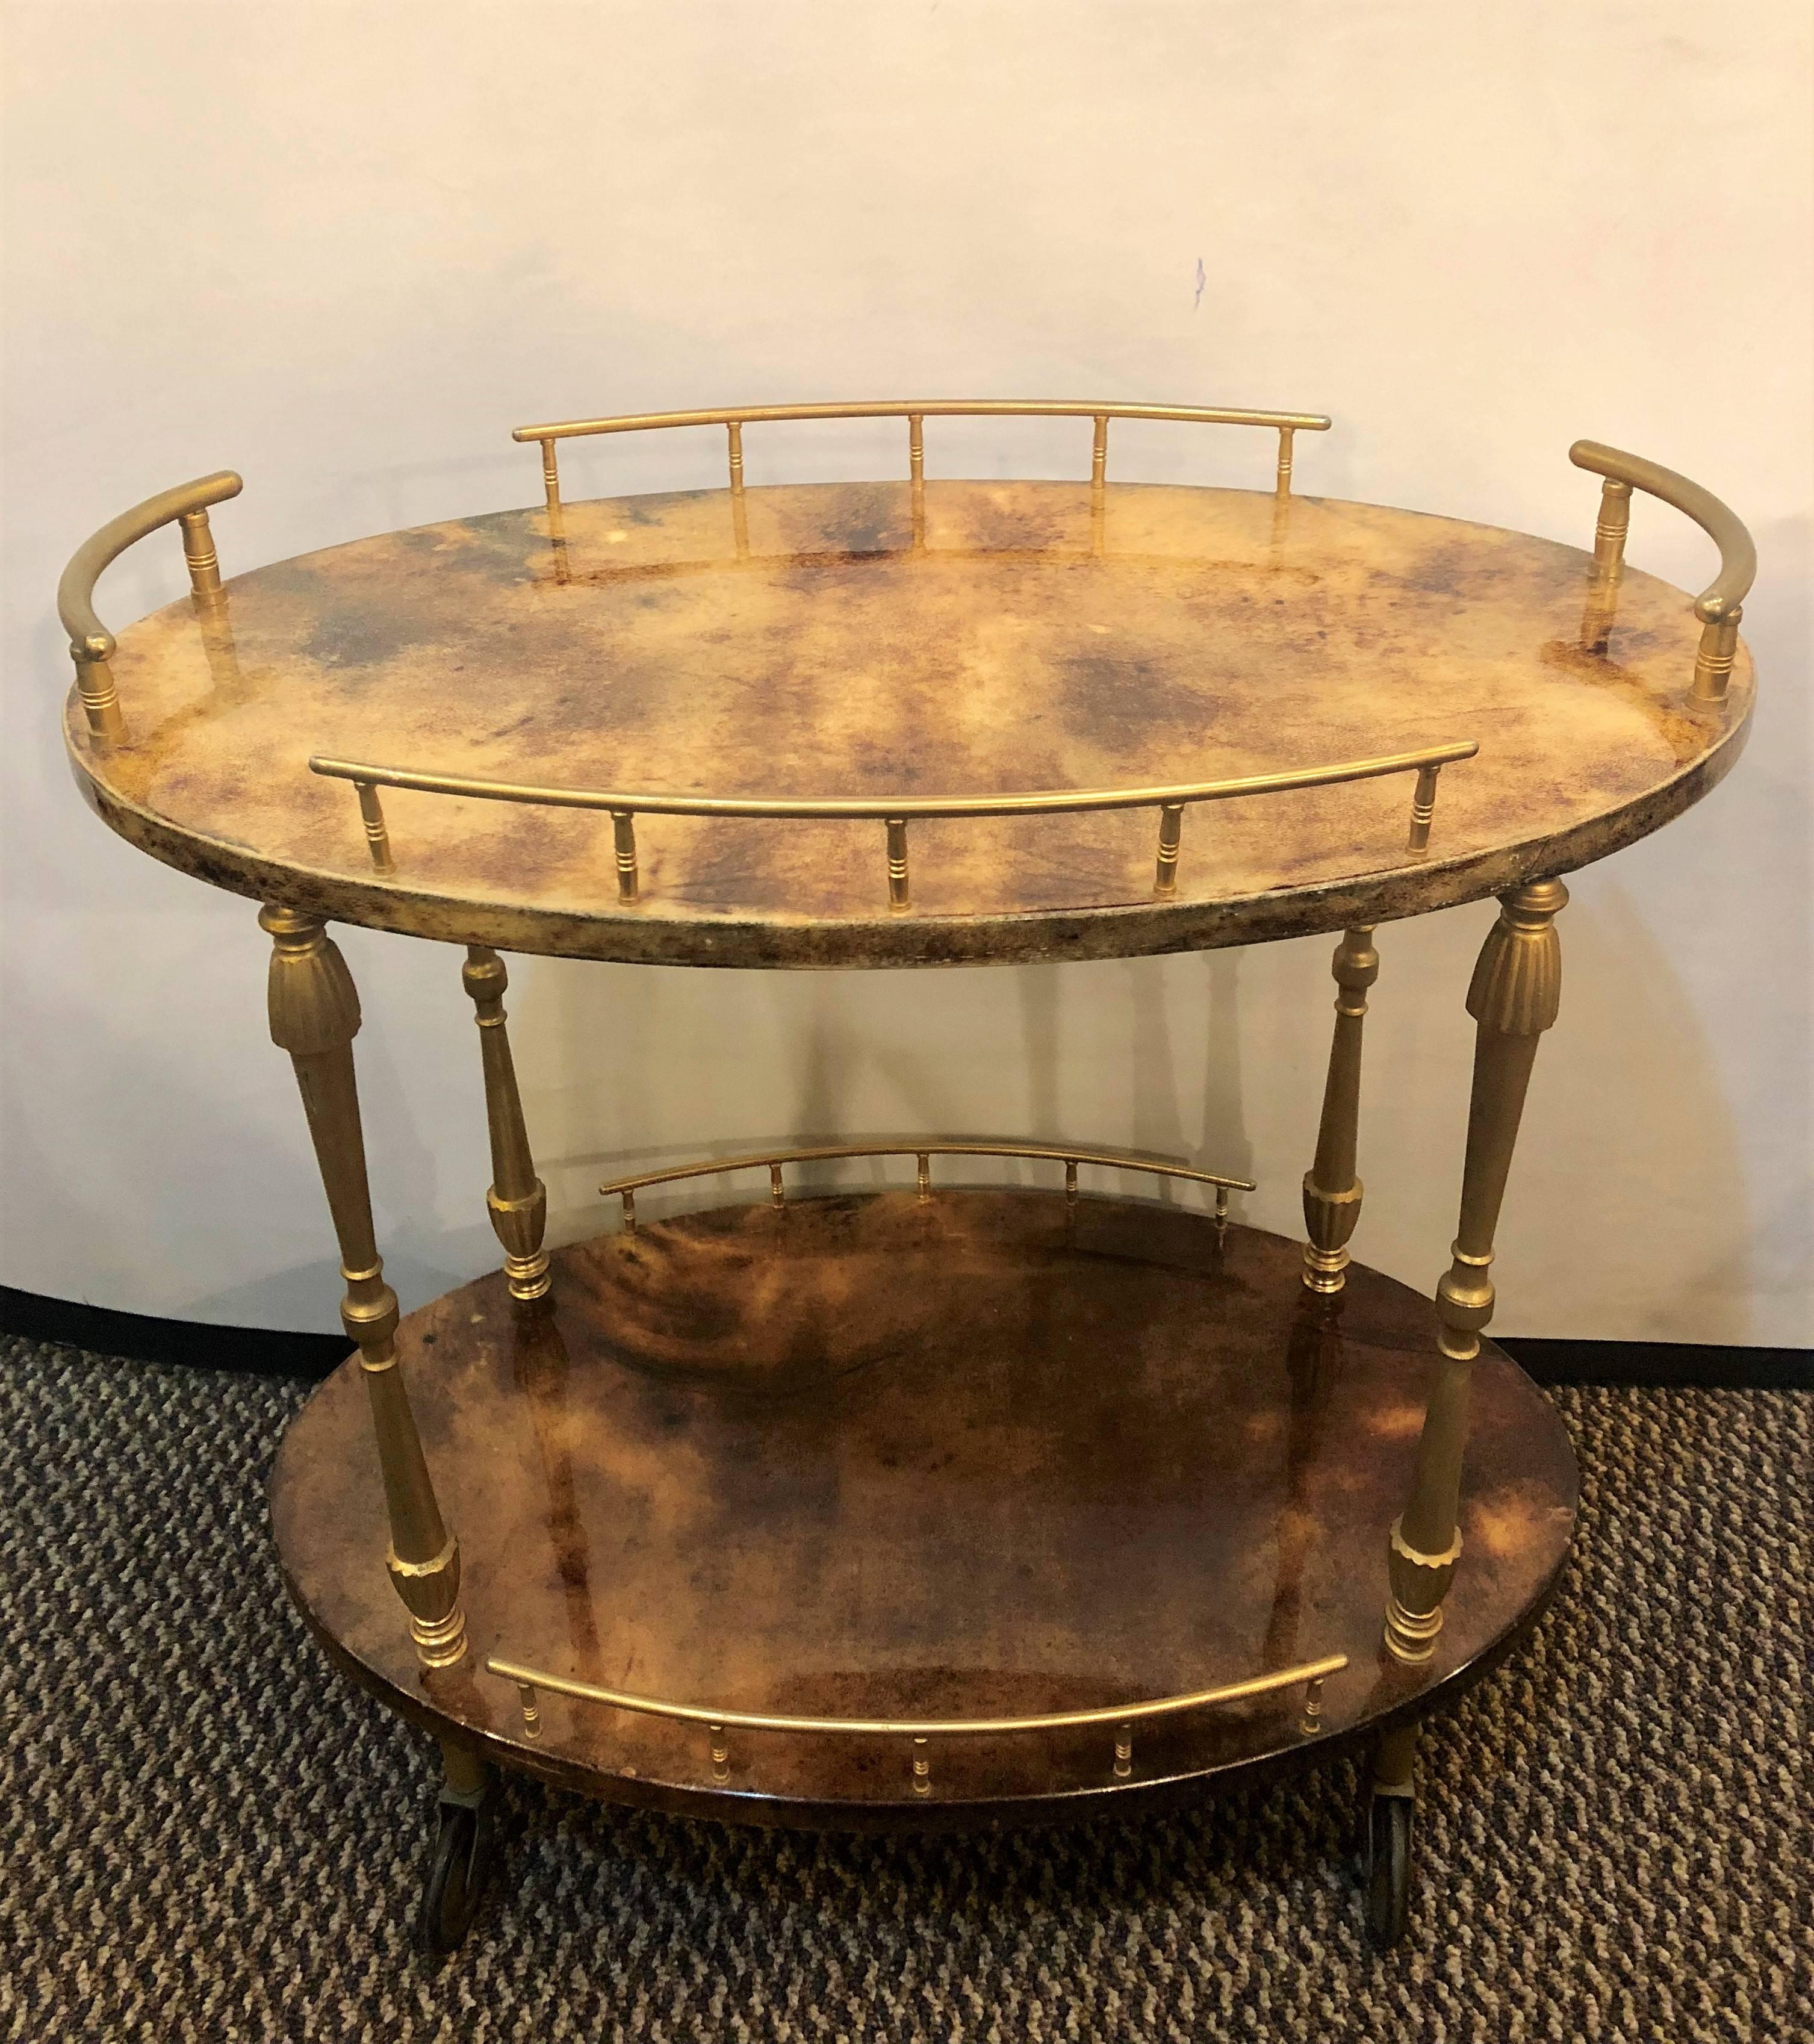 This sweet Aldo Tura diminutive modern goatskin trolley or serving wagon is certain to grab attention. Having a galleried brass top and bottom shelf this wonderfully designed cart by this highly sought after designer is certain to shock all when it